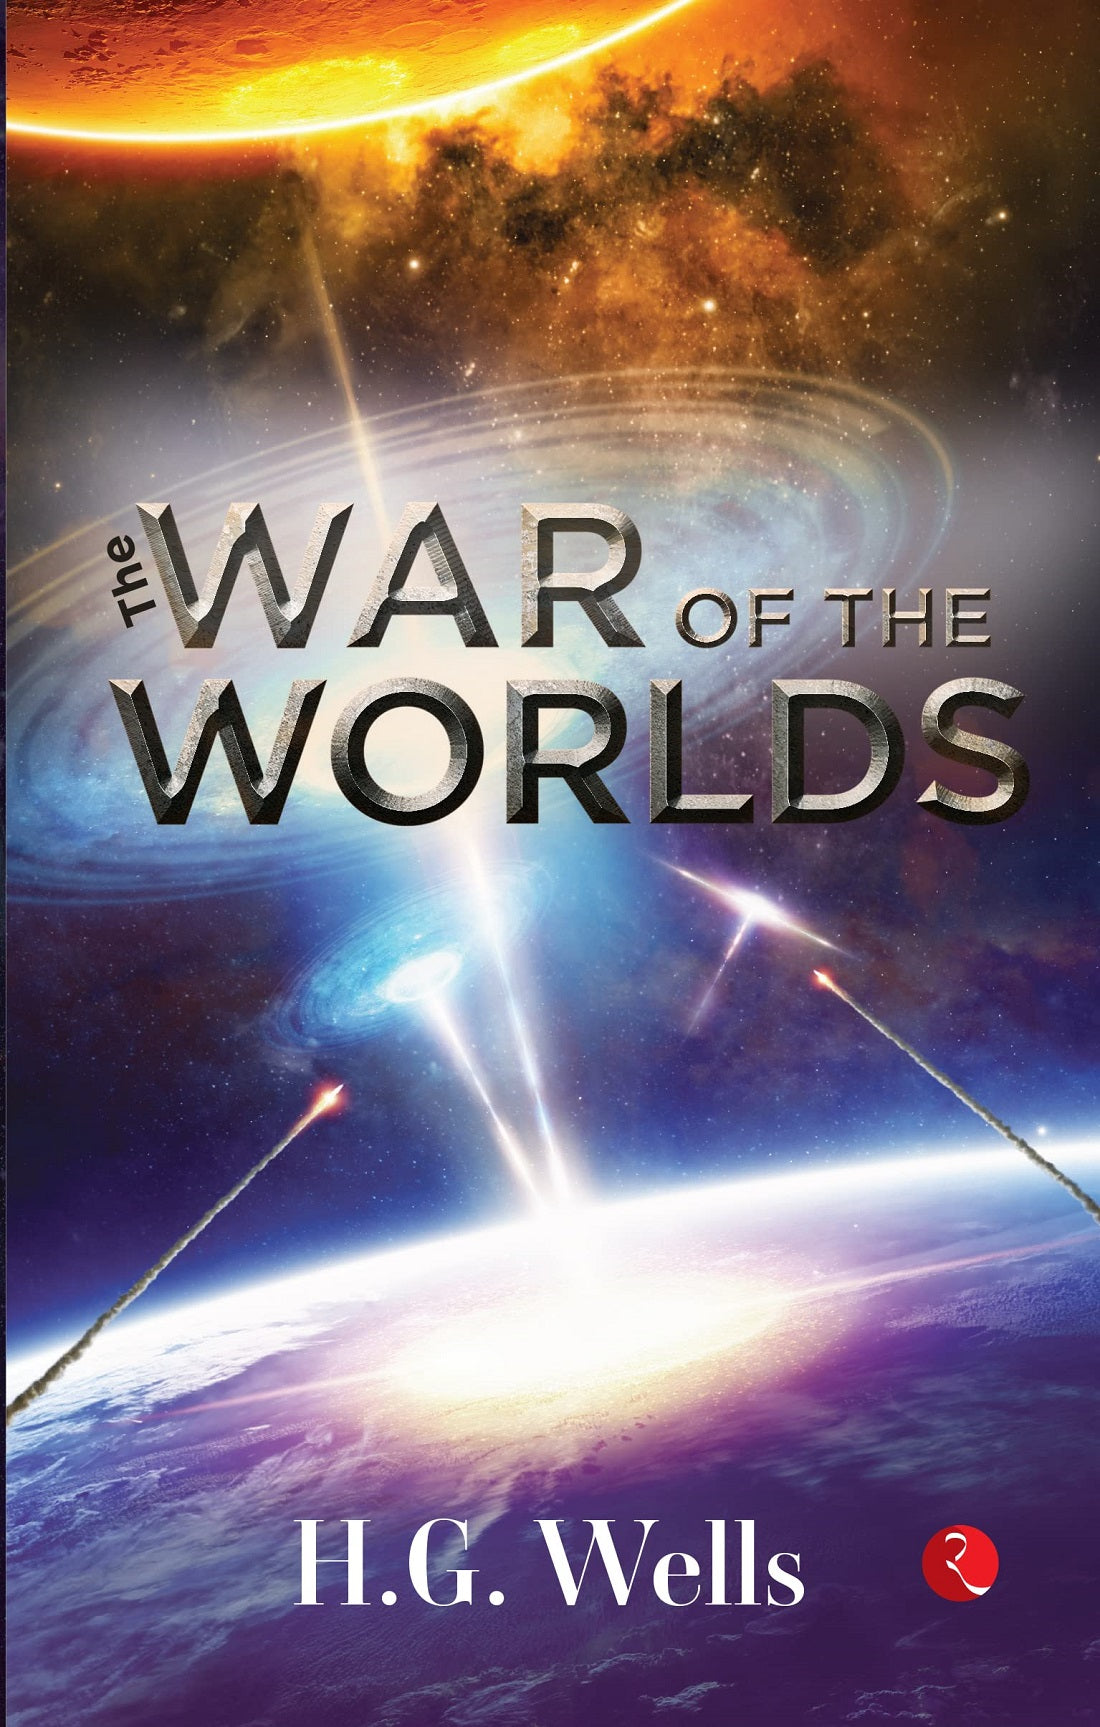 THE WAR OF THE WORLD